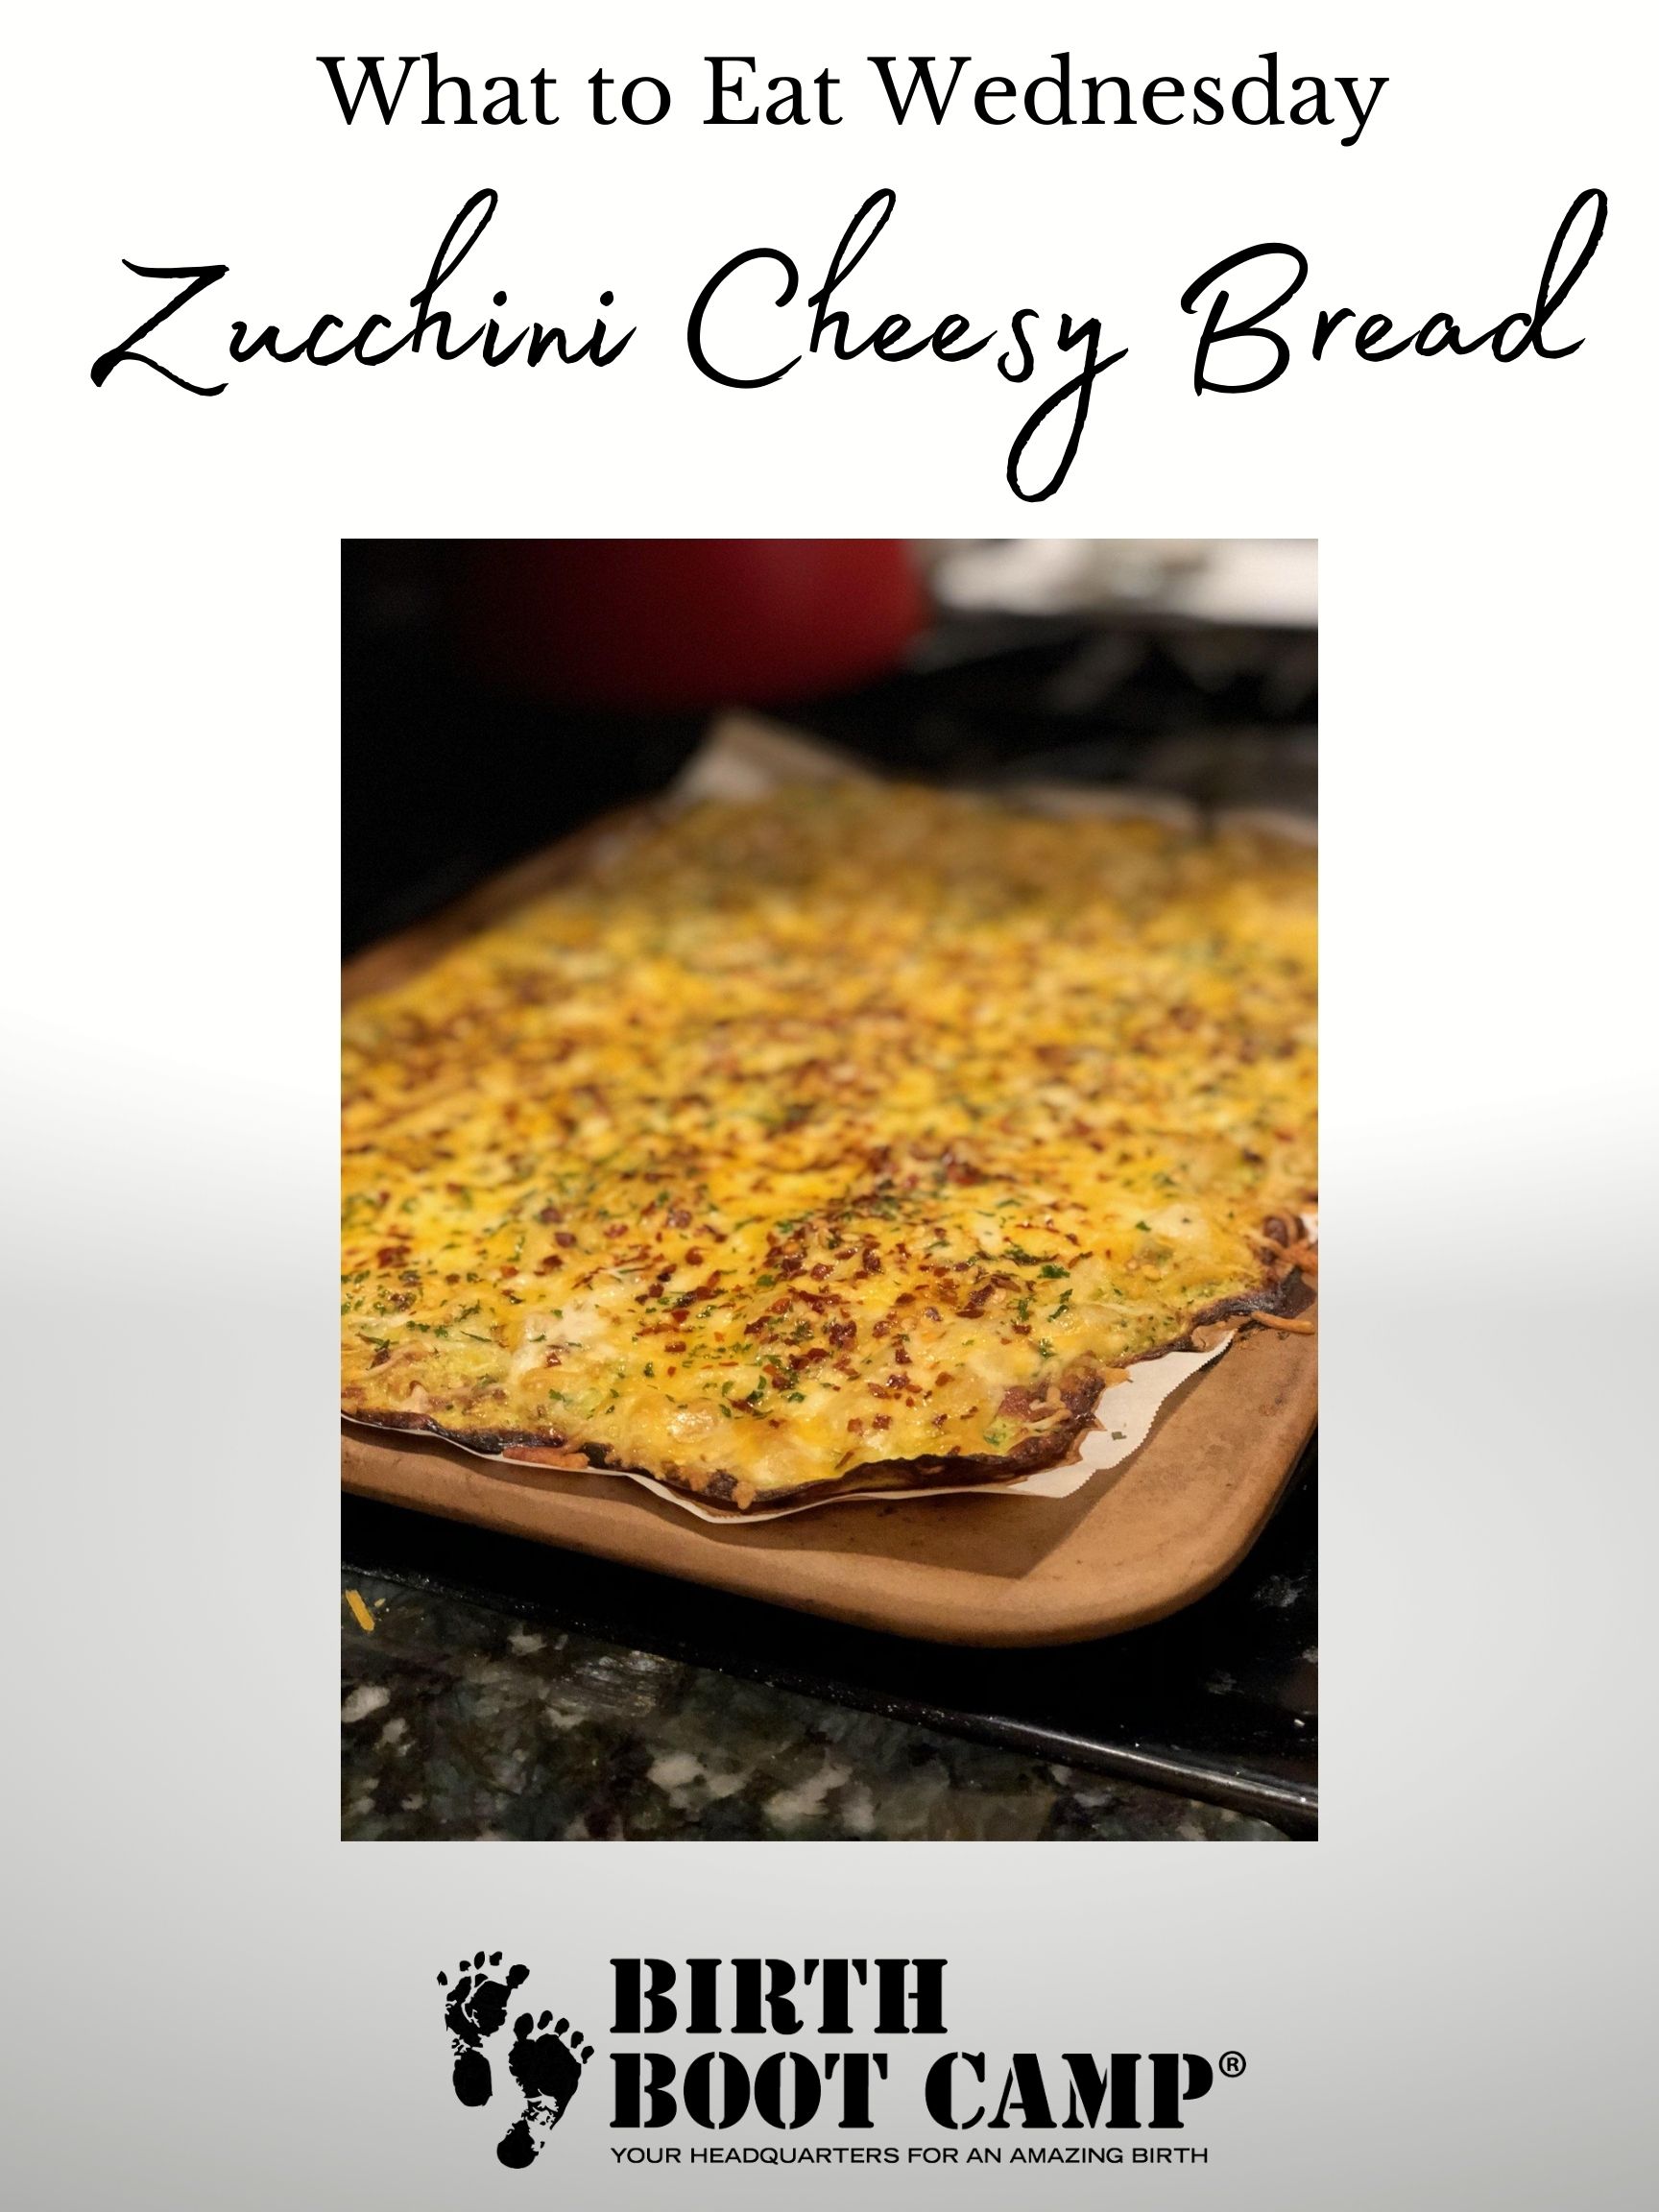 What to Eat Wednesday- Zucchini Cheesy Bread